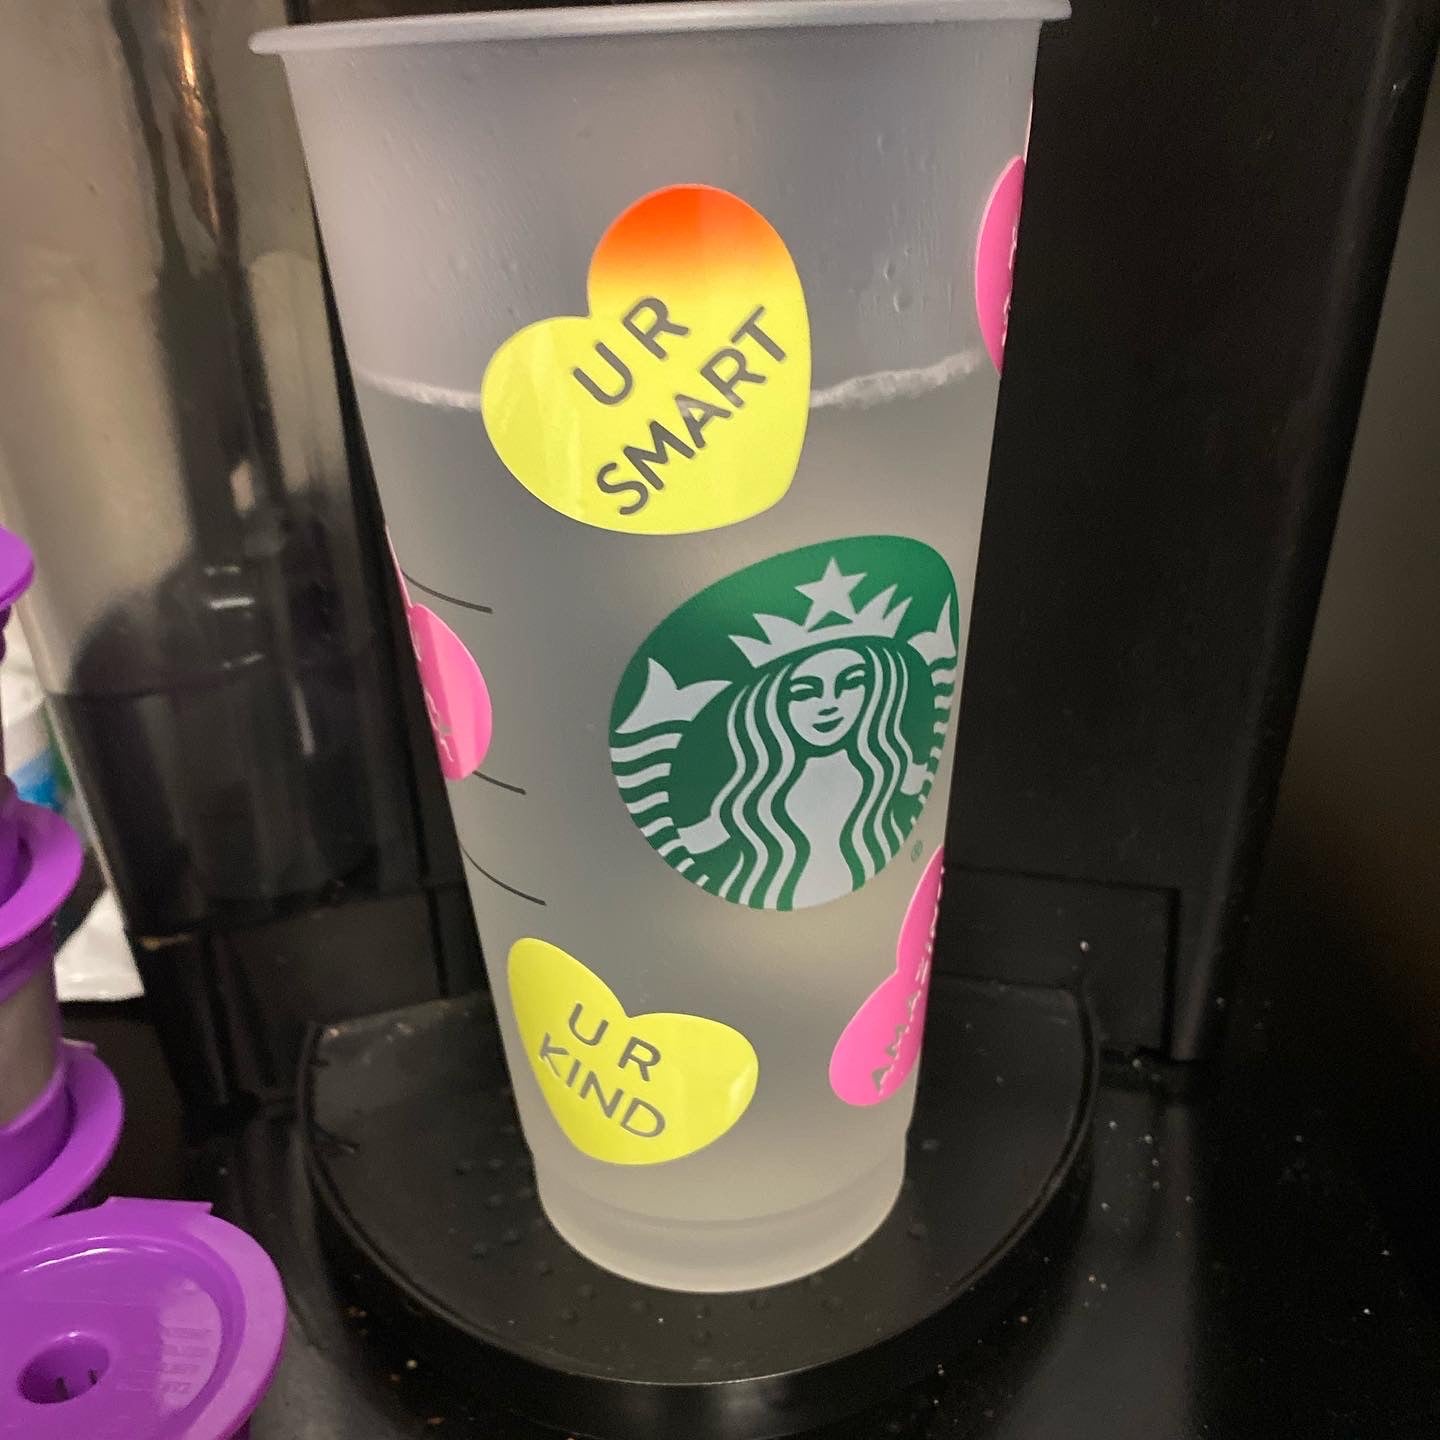 Starbucks Cold Cup